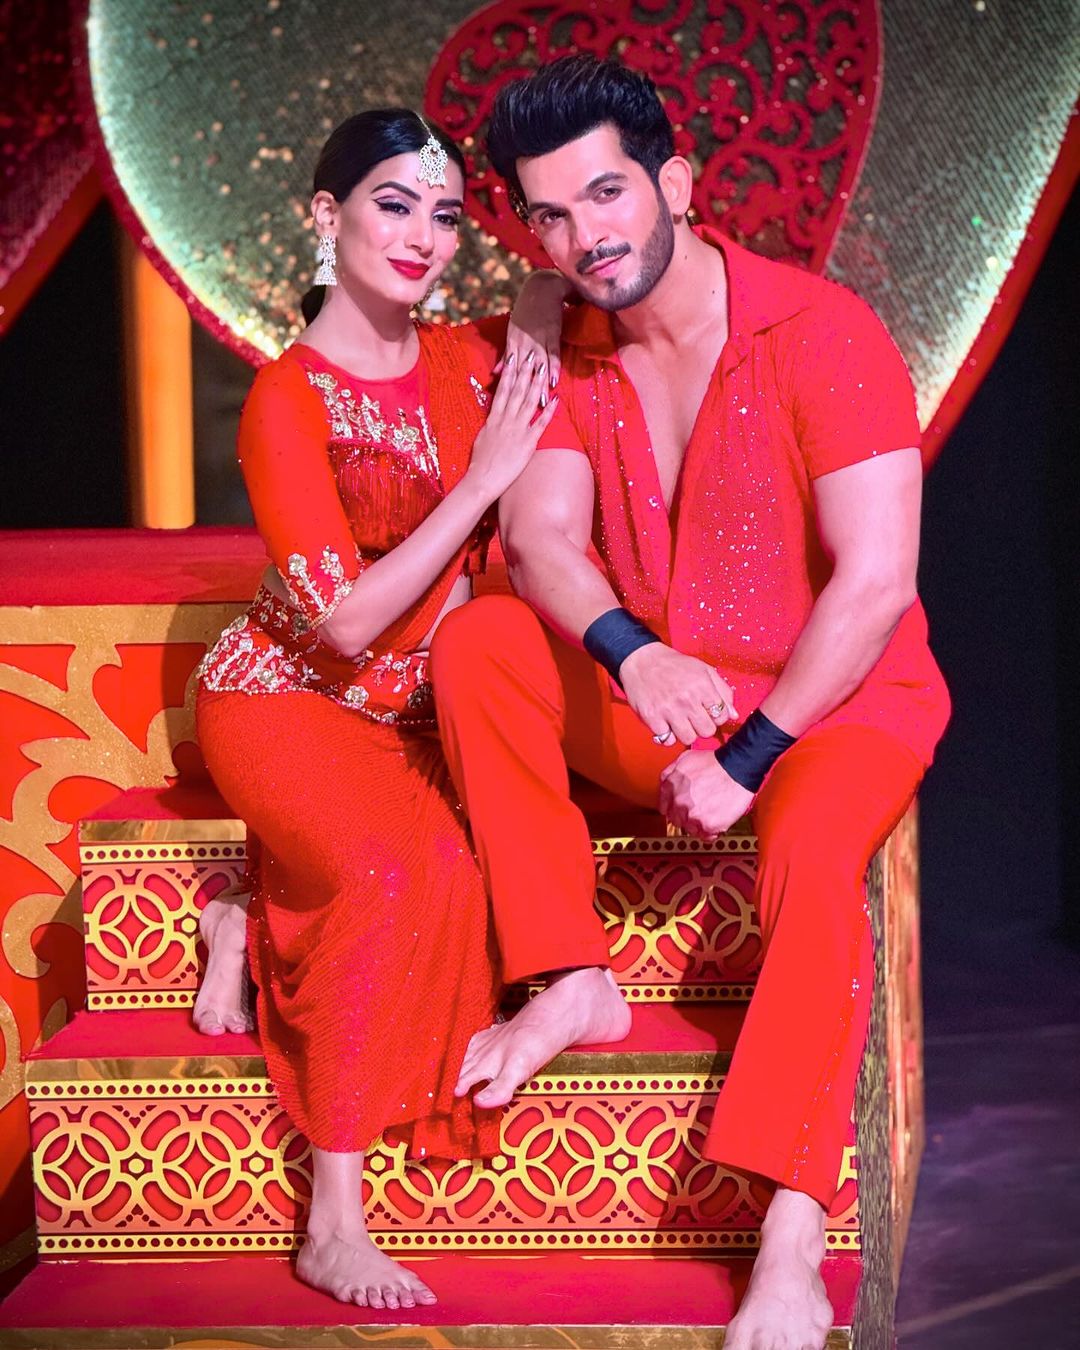 Arjun Bijlani Steals His Fans’ Heart Through Heart-Touching Dance Video With Nikki Sharma. Read To Know What It Is!